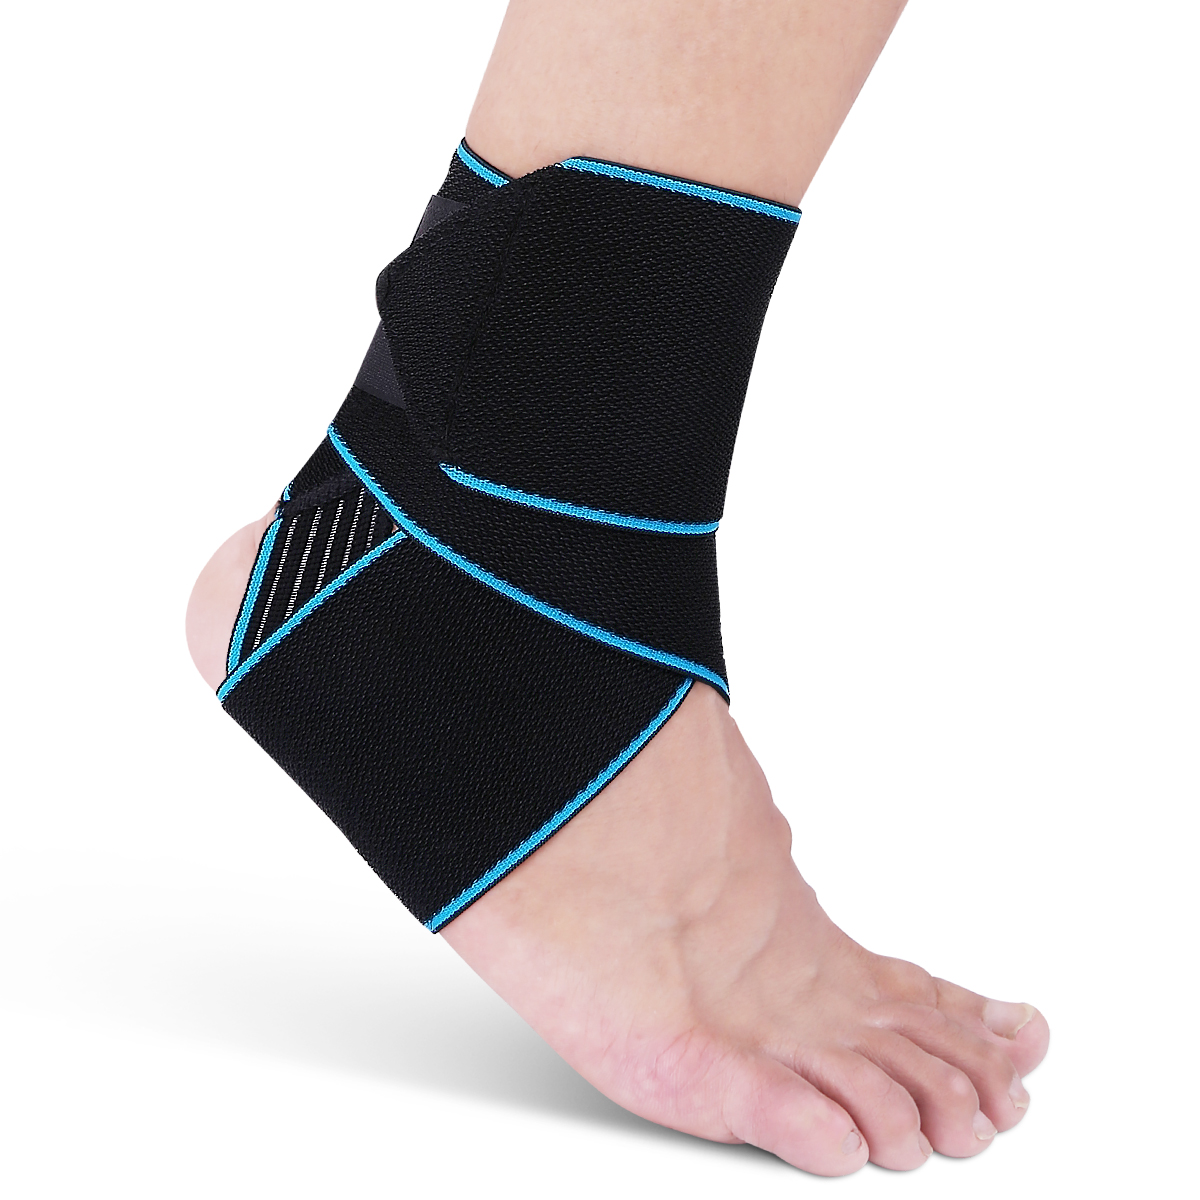 Ankle Support Brace Compression Adjustable, AVIDDA Ankle Brace Wrap Strap for Men Women Arch Support, Foot Care Breathable Ankle Support for Ankle Pain, Plantar Fasciitis, Ankle Sprain Recovery